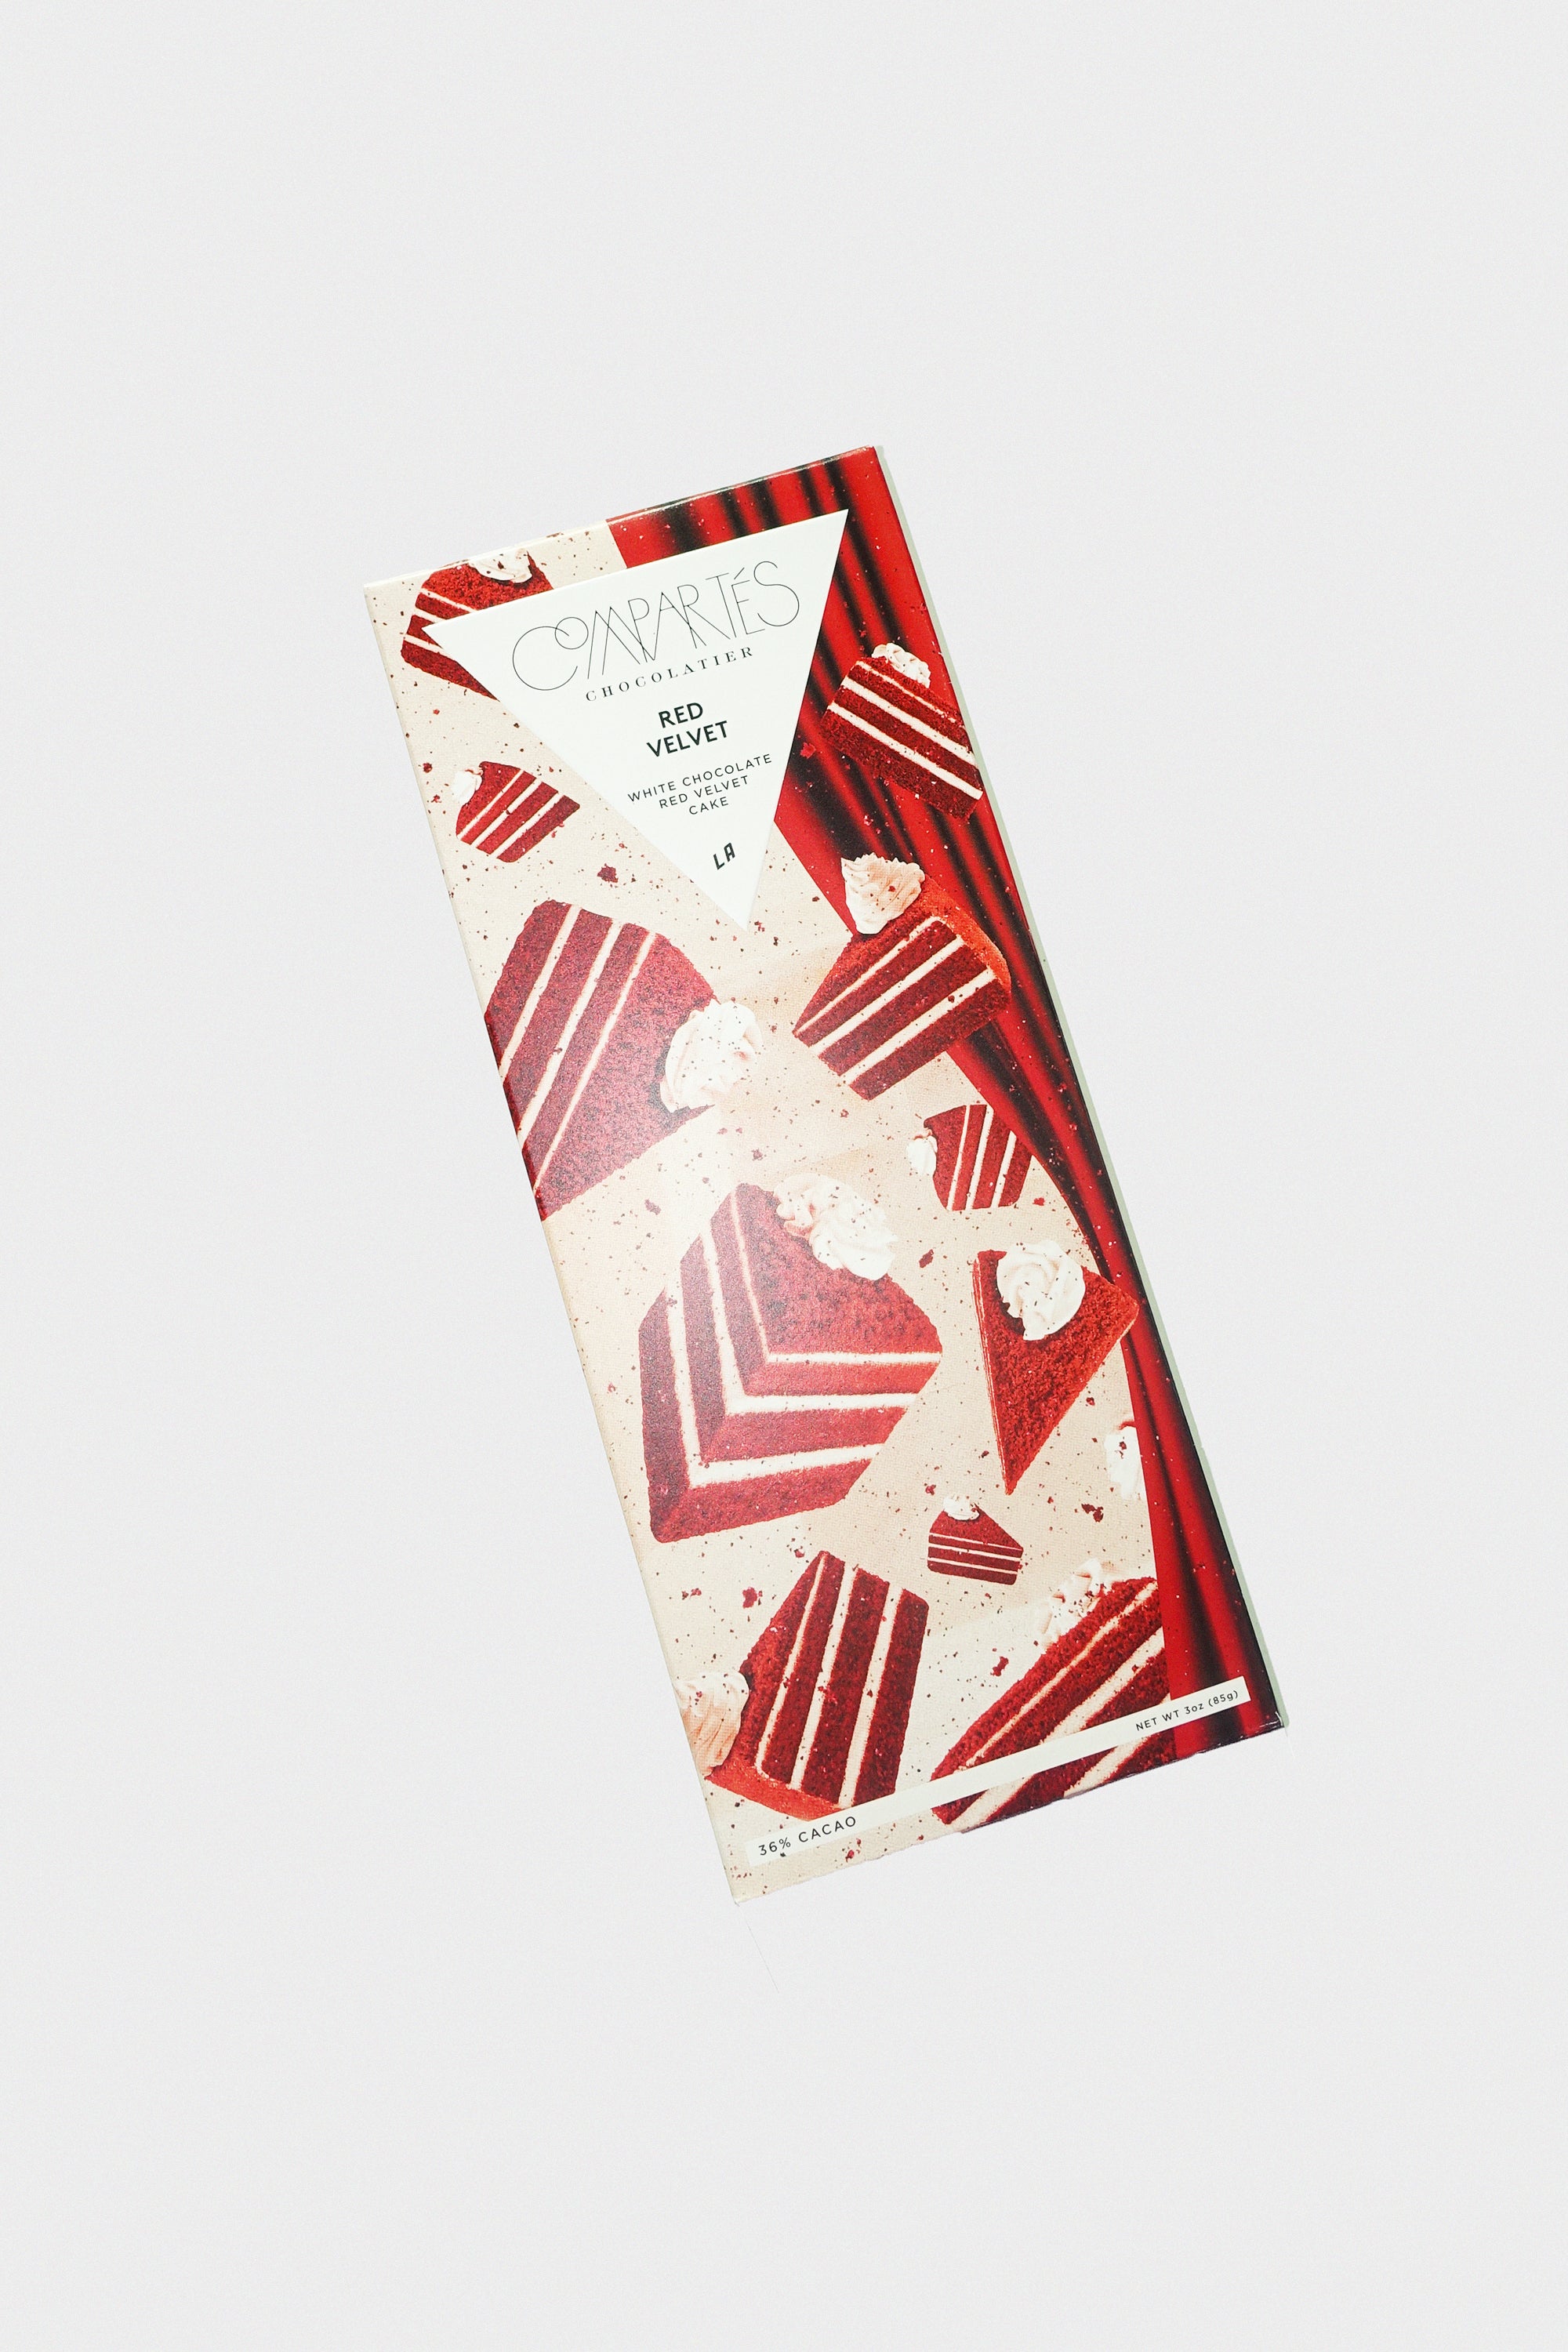 Red Velvet White Chocolate Bar by Compartes